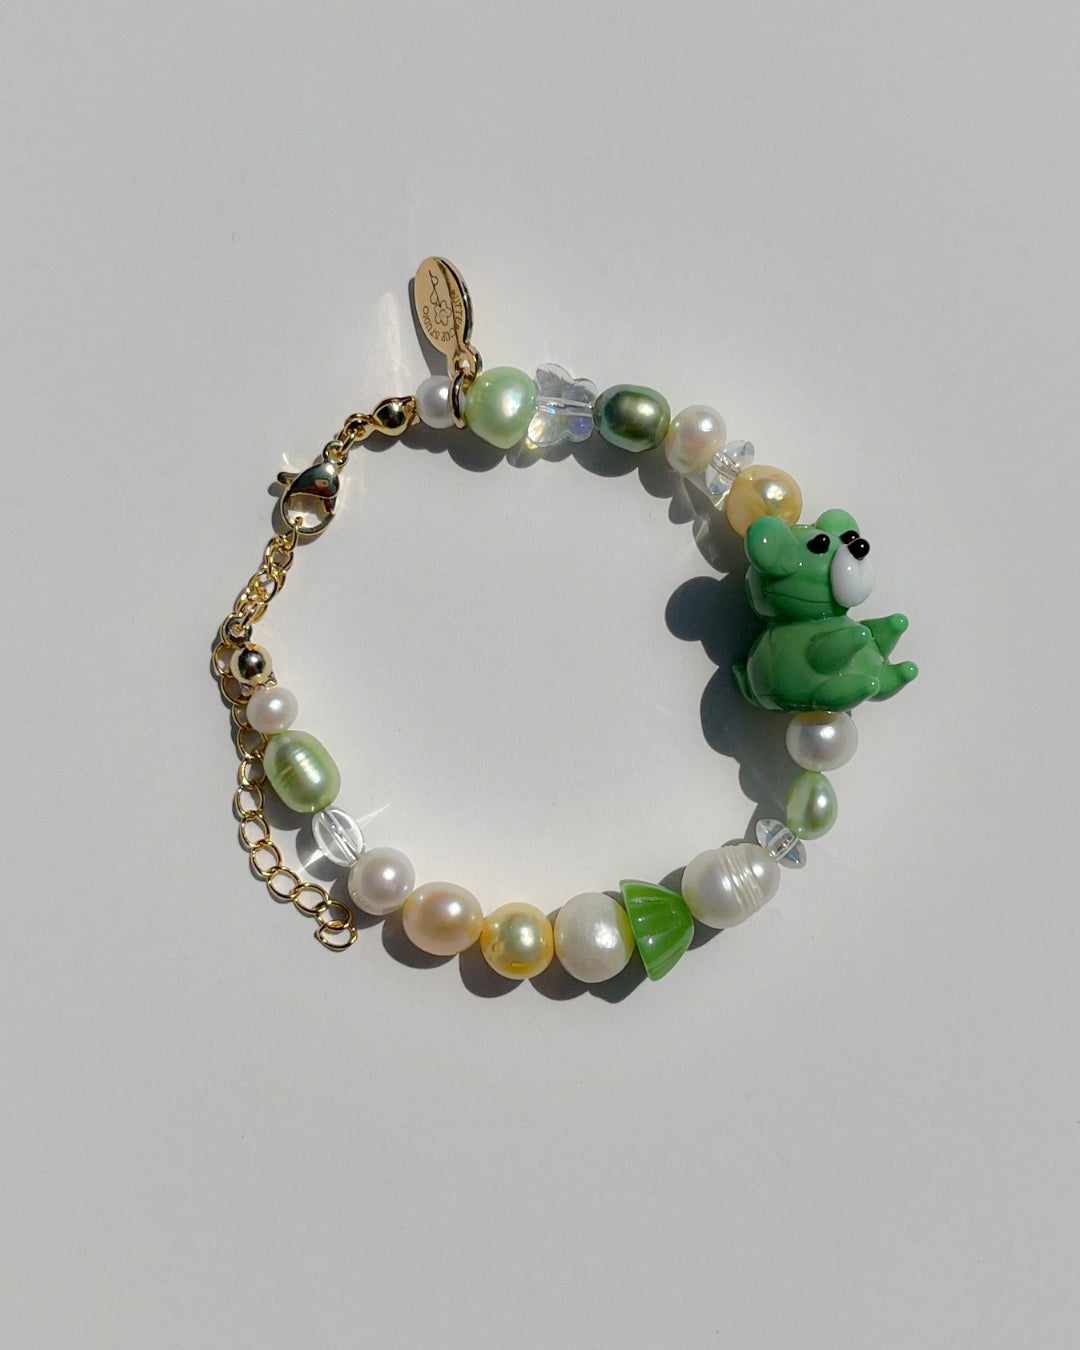 A studio shot of Buttercup Studio's Teddy Forest Garden Freshwater Pearls Bracelet. Made with assorted freshwater pearls, clear and green beads and a special lampwork glass green teddy bead.